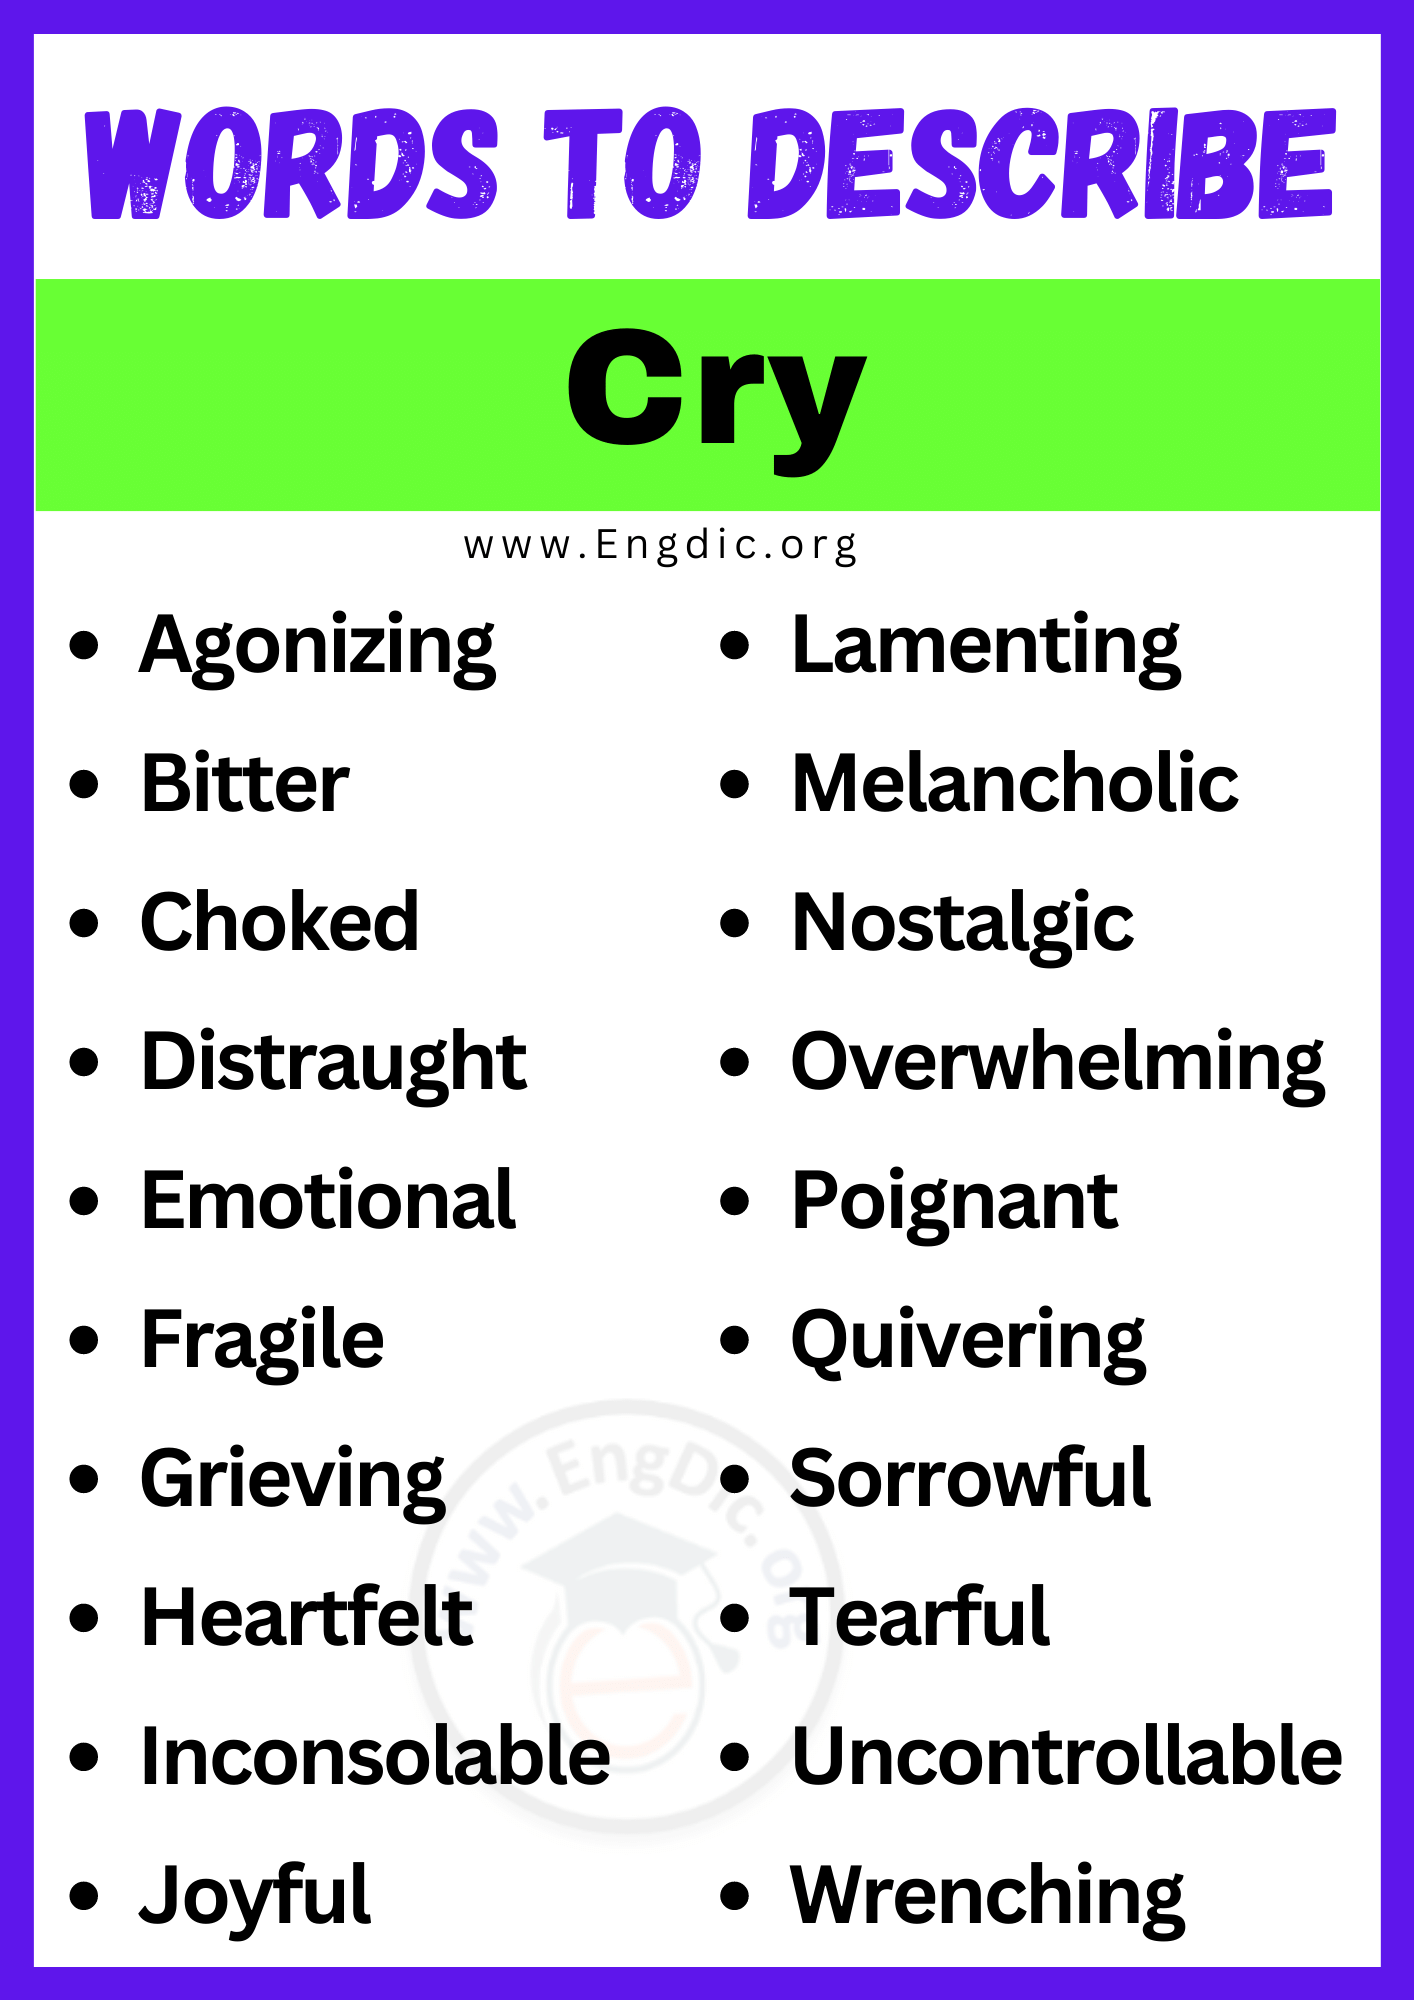 Words to Describe Cry